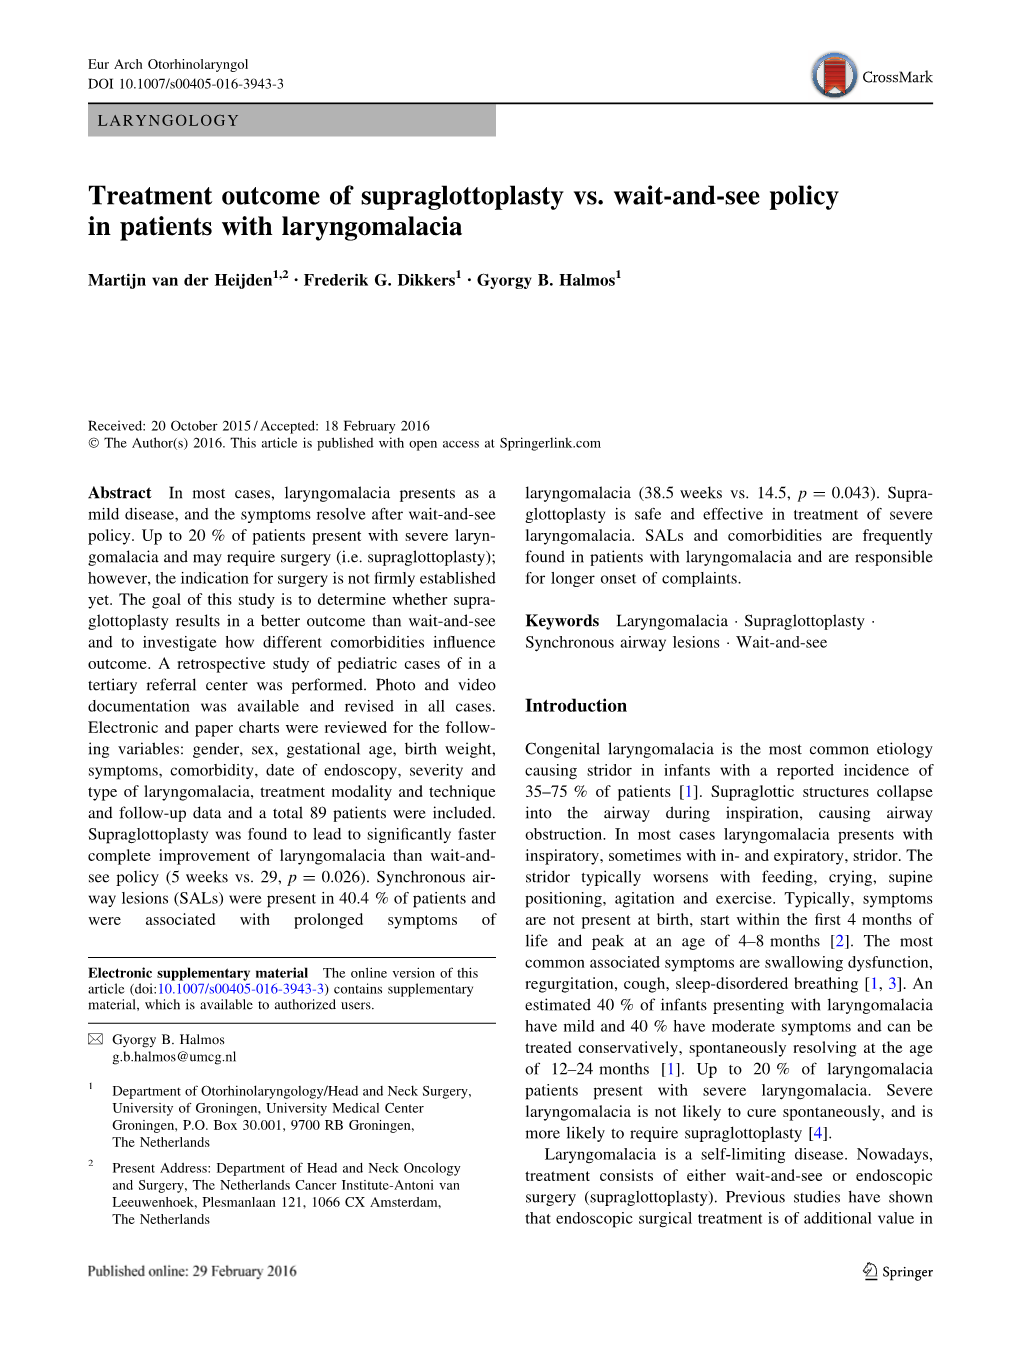 Treatment Outcome of Supraglottoplasty Vs. Wait-And-See Policy in Patients with Laryngomalacia